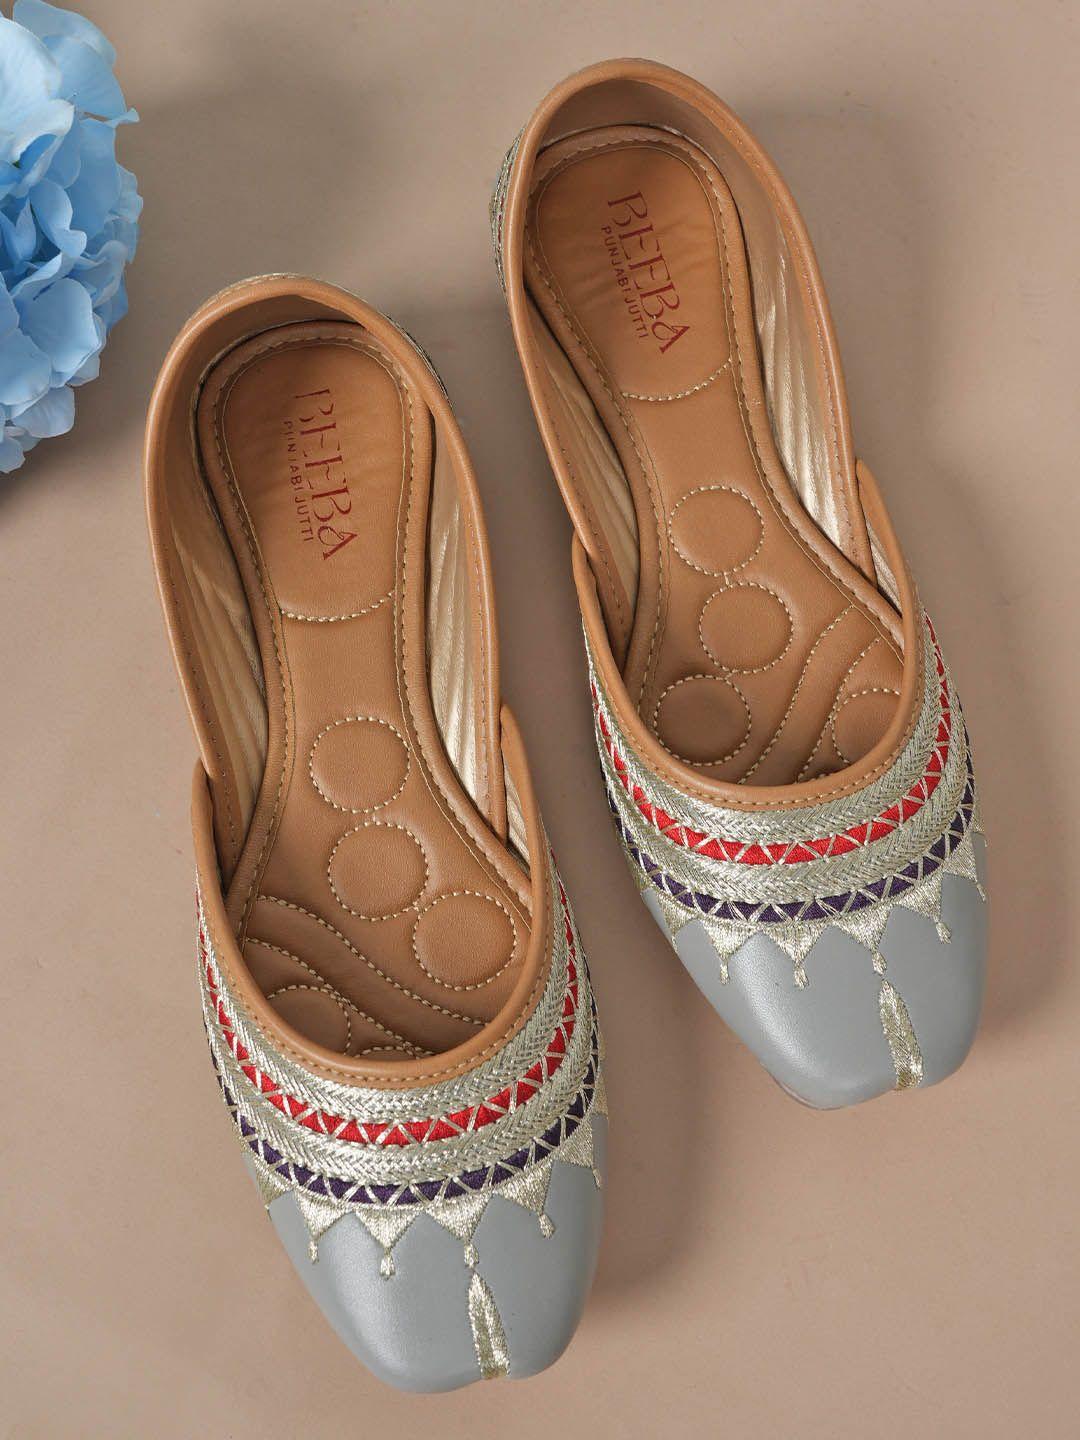 style-shoes-embroidered-ethnic-mojaris